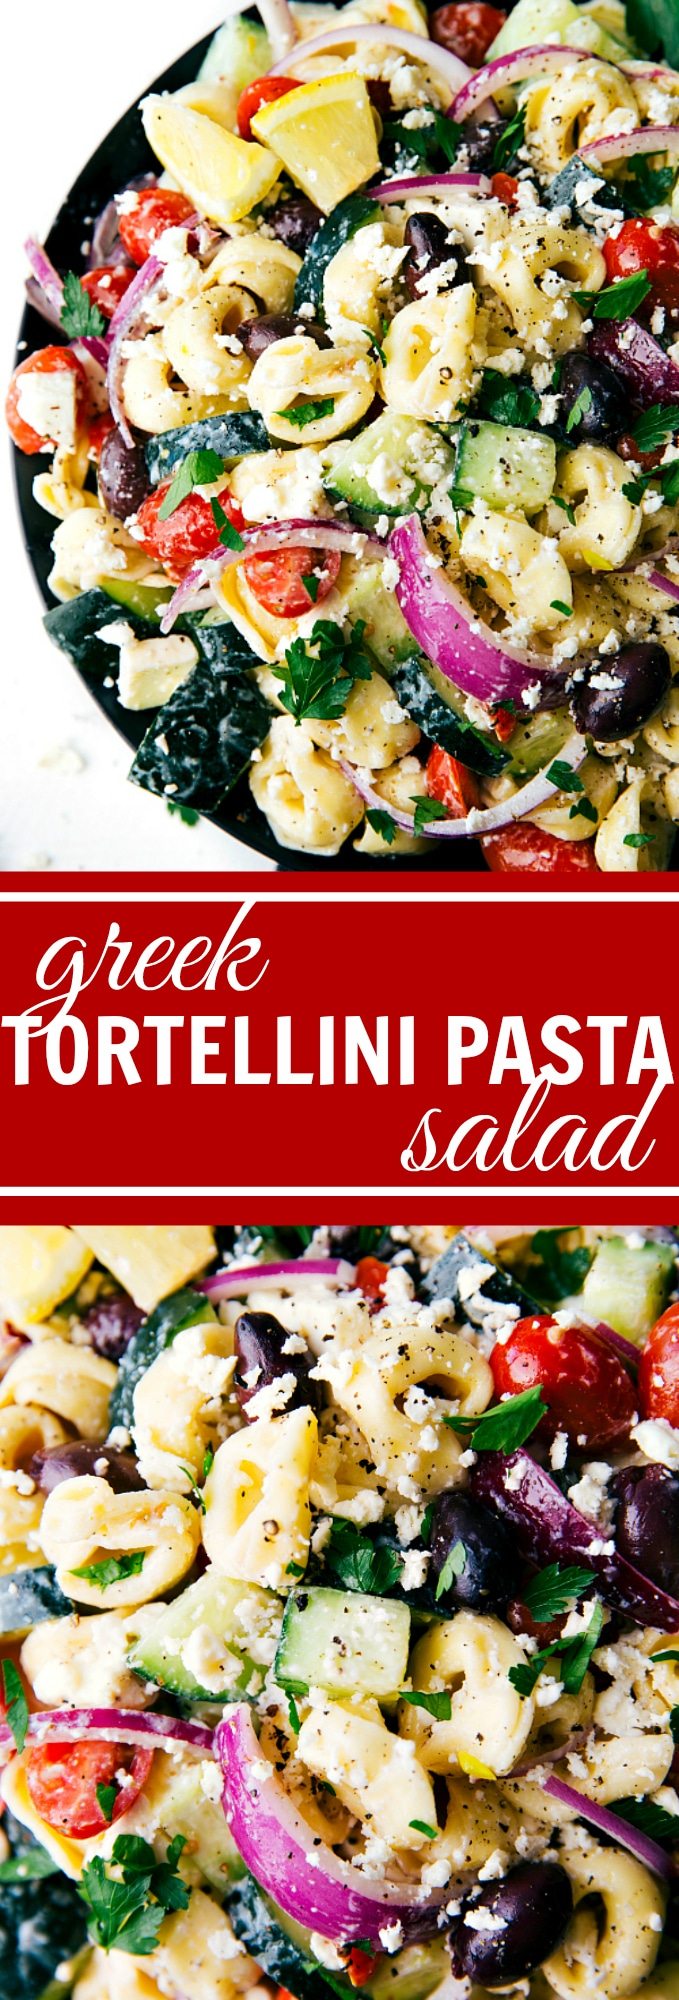 Easy Greek tortellini pasta salad with a healthier (no mayo) dressing. Feta, cucumbers, cherry tomatoes, red onions, olives, tortellini.